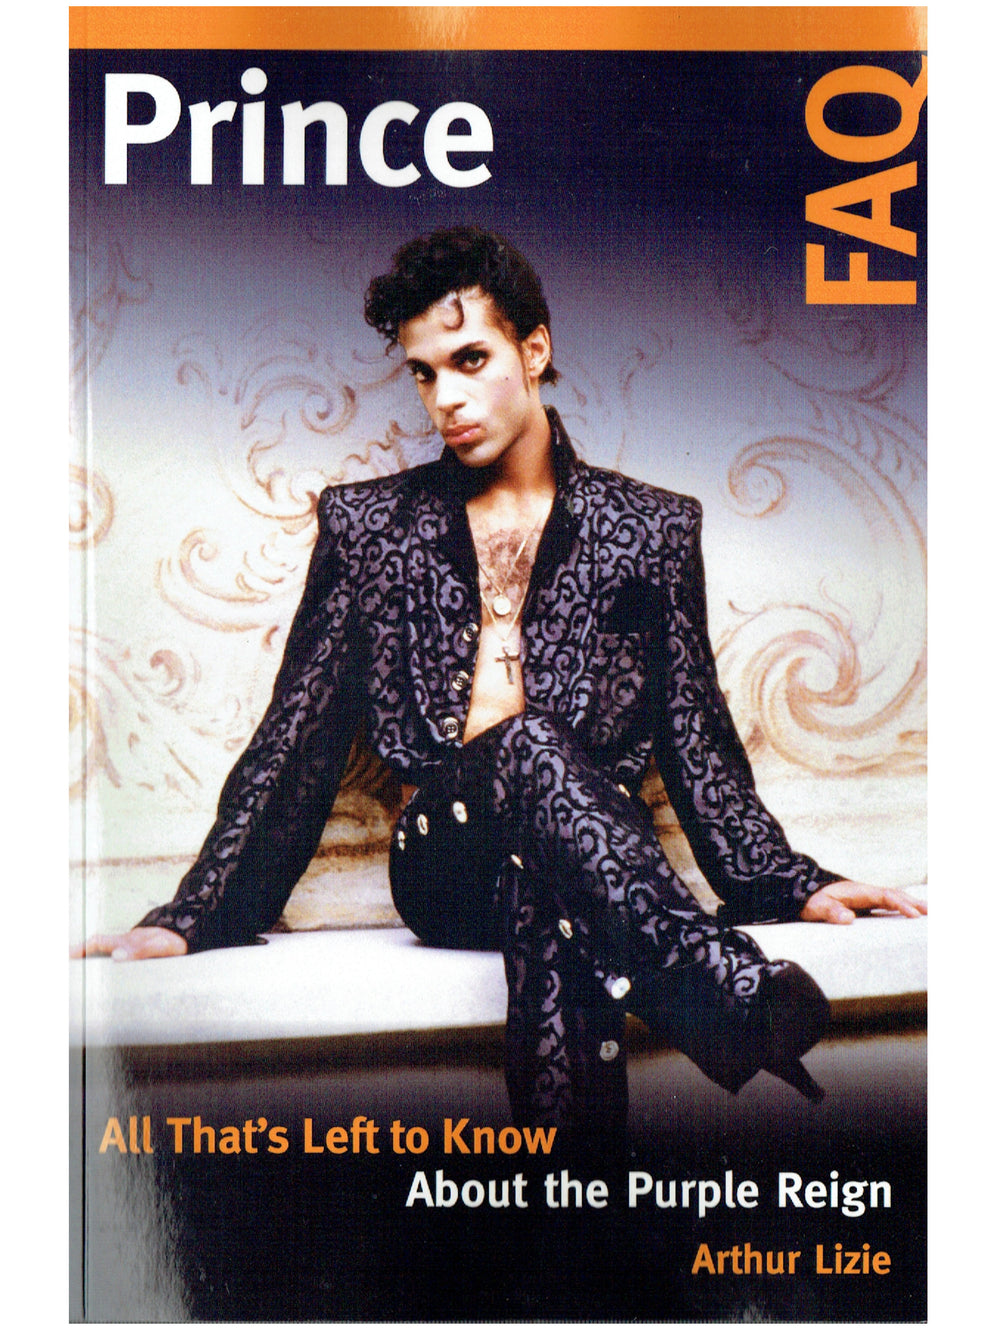 Prince FAQ All That's Left To Know About the Purple Reign Softbacked Book Brand New